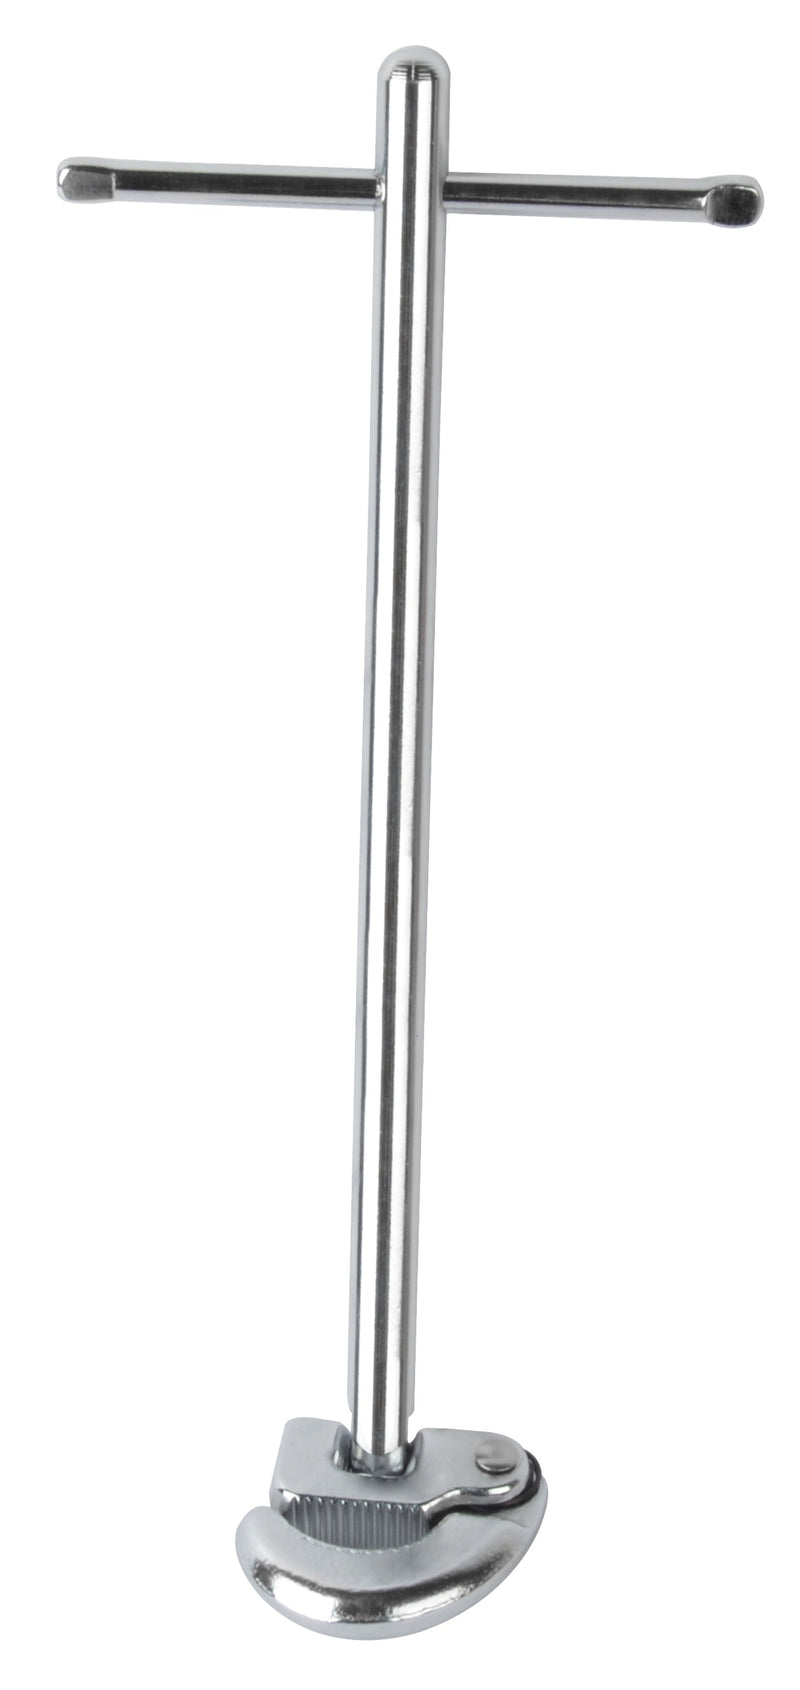 Standing faucet nut wrench